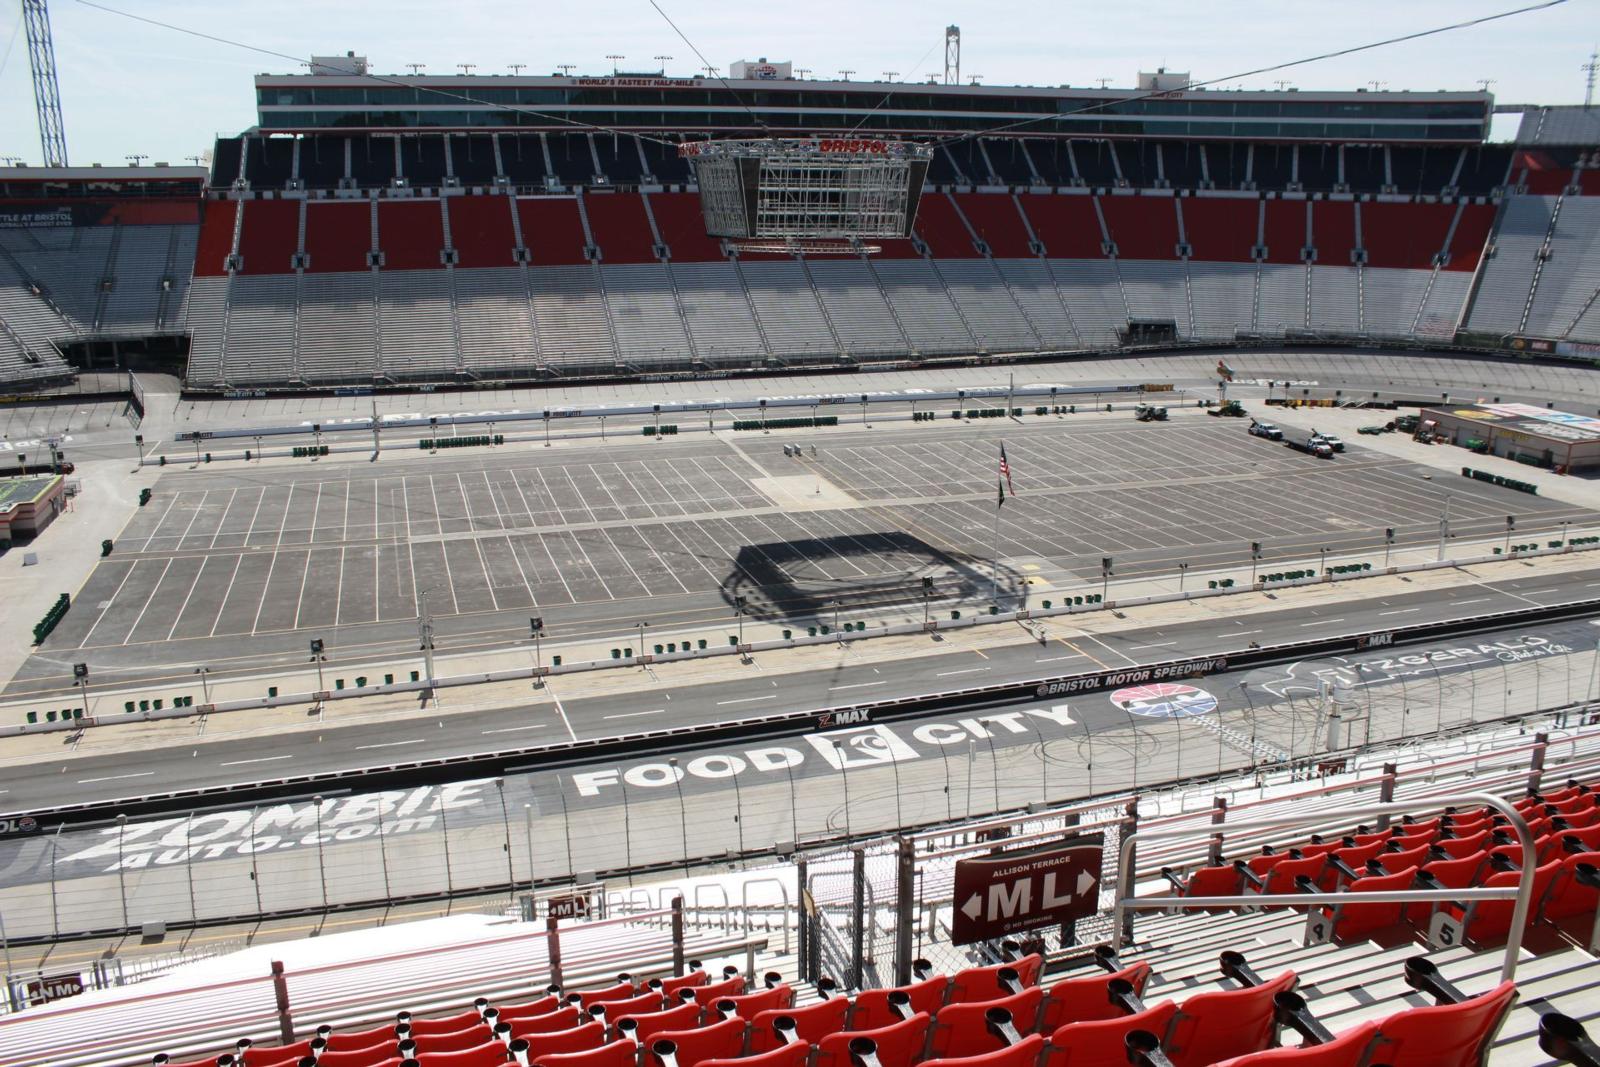 Seating Chart Events Bristol Motor Speedway